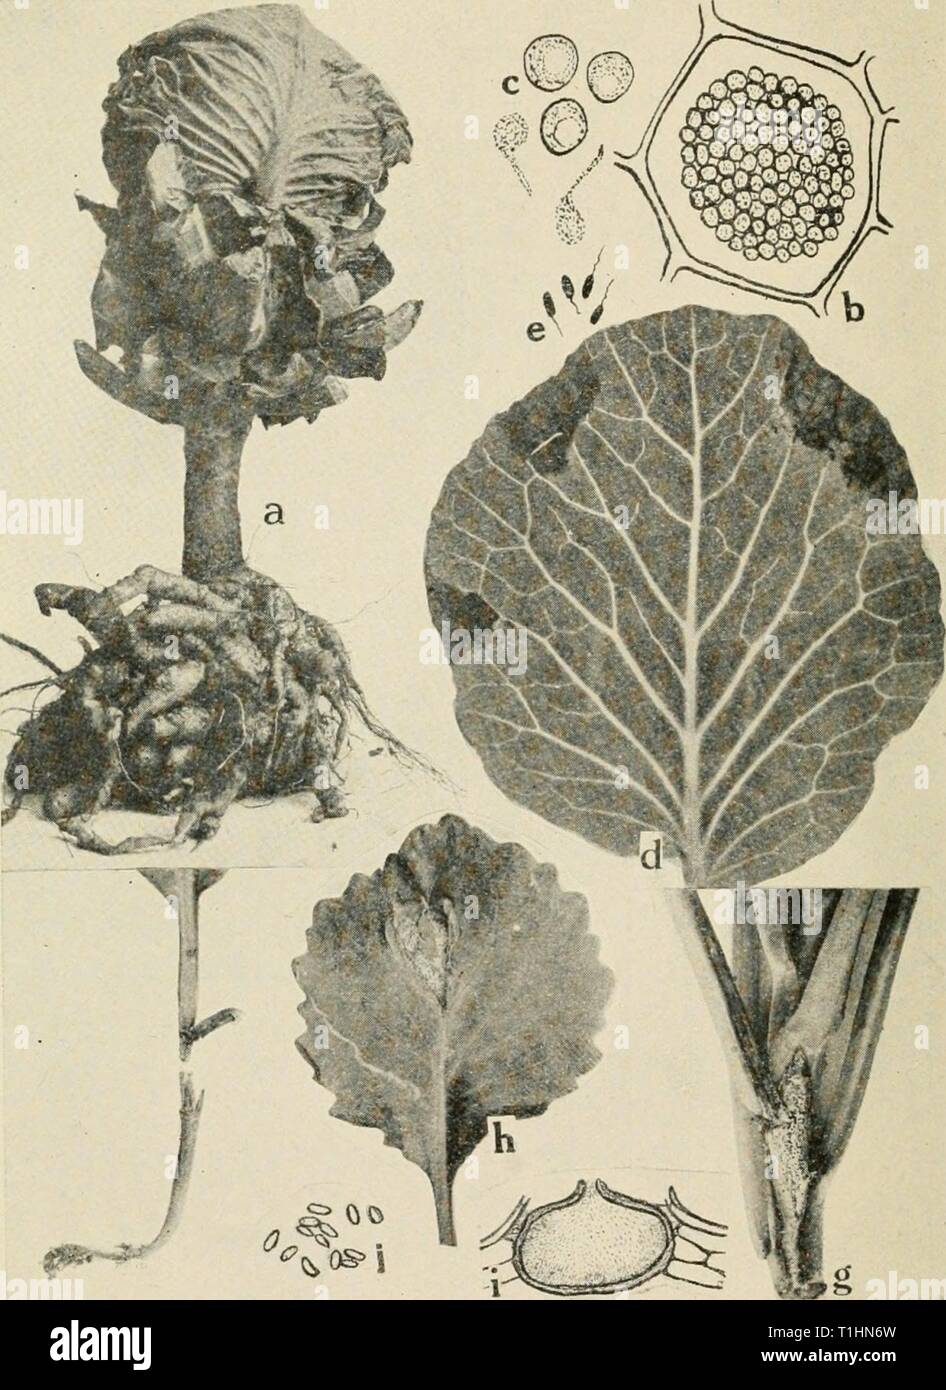 Diseases of truck crops and Diseases of truck crops and their control  diseasesoftruckc00taub Year: 1918  Fig. 30. Cabbage Diseases. a. Club root (after Cunningham), b. cell filled with spores of the club root or- ganism, c. spores and swarm spores of Plasmodiophora brassicce (b. and c. after Chuff), d. black rot of cabbage (after F. C. Stewart), e. individual black rot germs of Pseudomonas campeslris, f. black-leg on young cabbage seedling, g. black-leg lesion on foot of older cabbage plant, h. black-leg lesion on cabbage leaf, /. pycnidmm of Phoma oleracece, j. pycnosporvs of P. okracece (/' Stock Photo